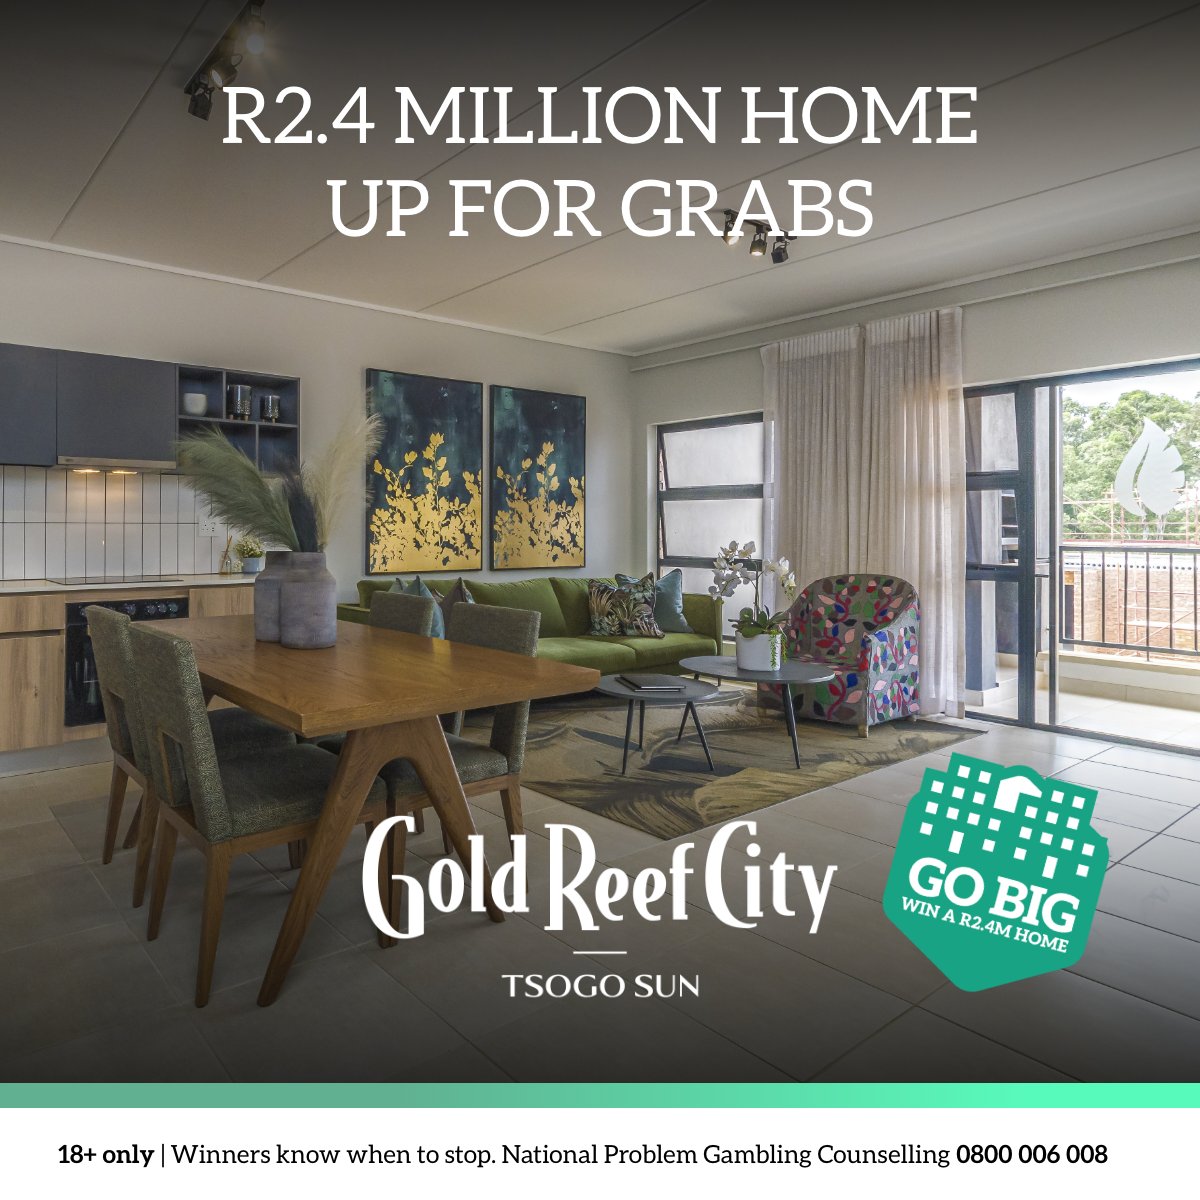 Your chance to WIN a R2.4 million luxury home at the Thaba-Eco village is nearly here! Hurry and enter the Go Big promotion before 31 March, by spending R300 or more at participating outlets or visit Gold Reef City with your Rewards card. Times running out, only one month left to